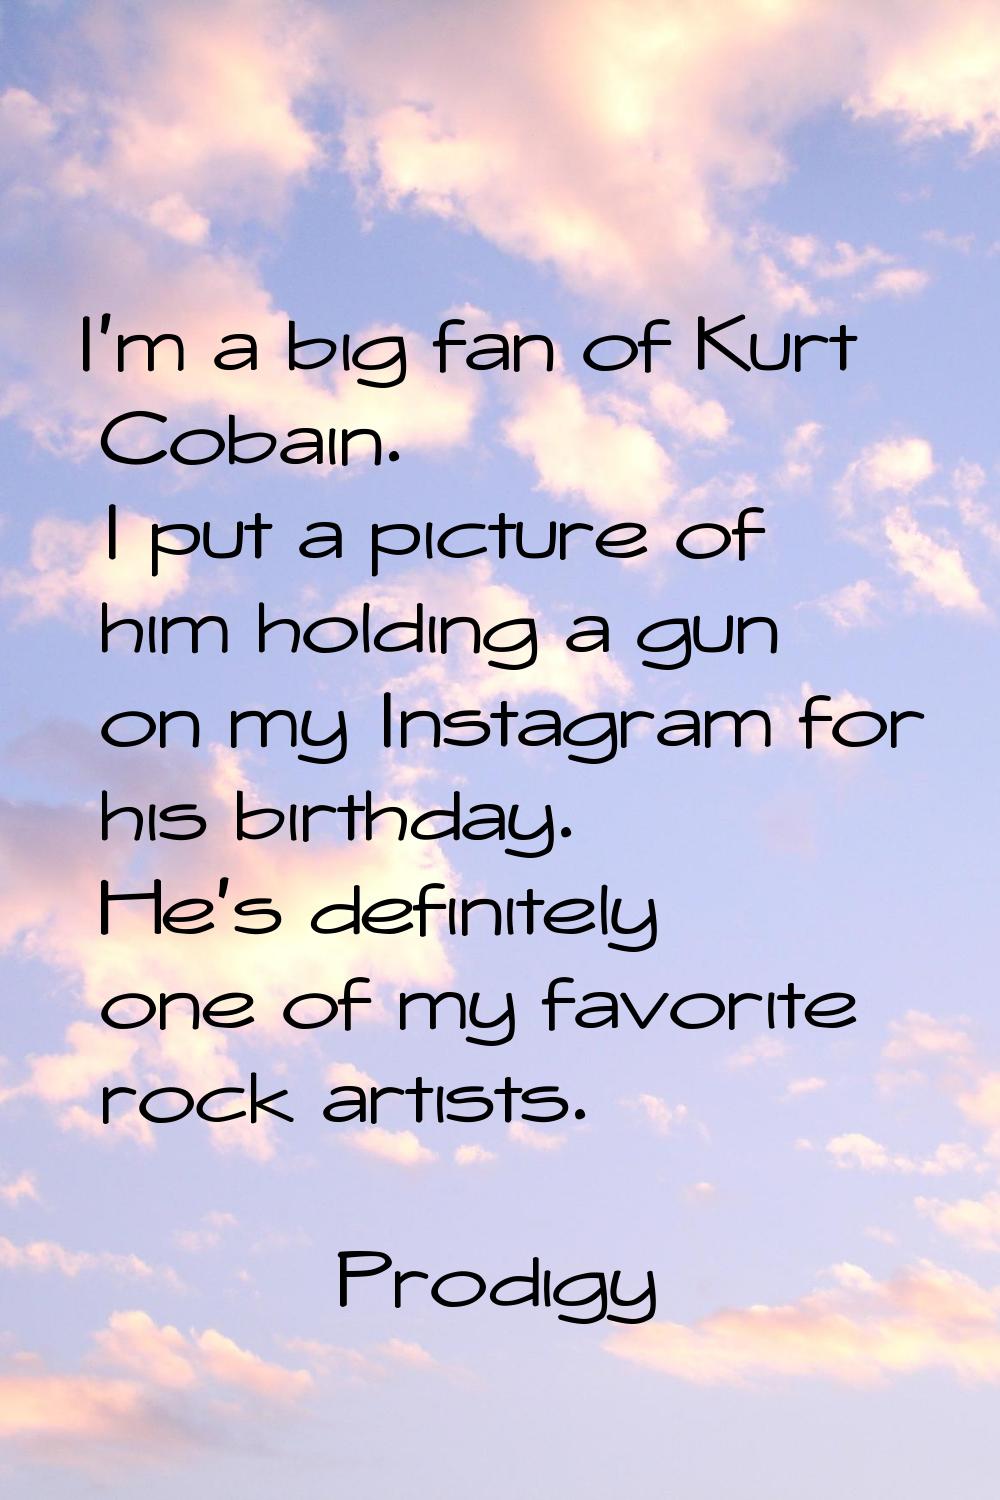 I'm a big fan of Kurt Cobain. I put a picture of him holding a gun on my Instagram for his birthday